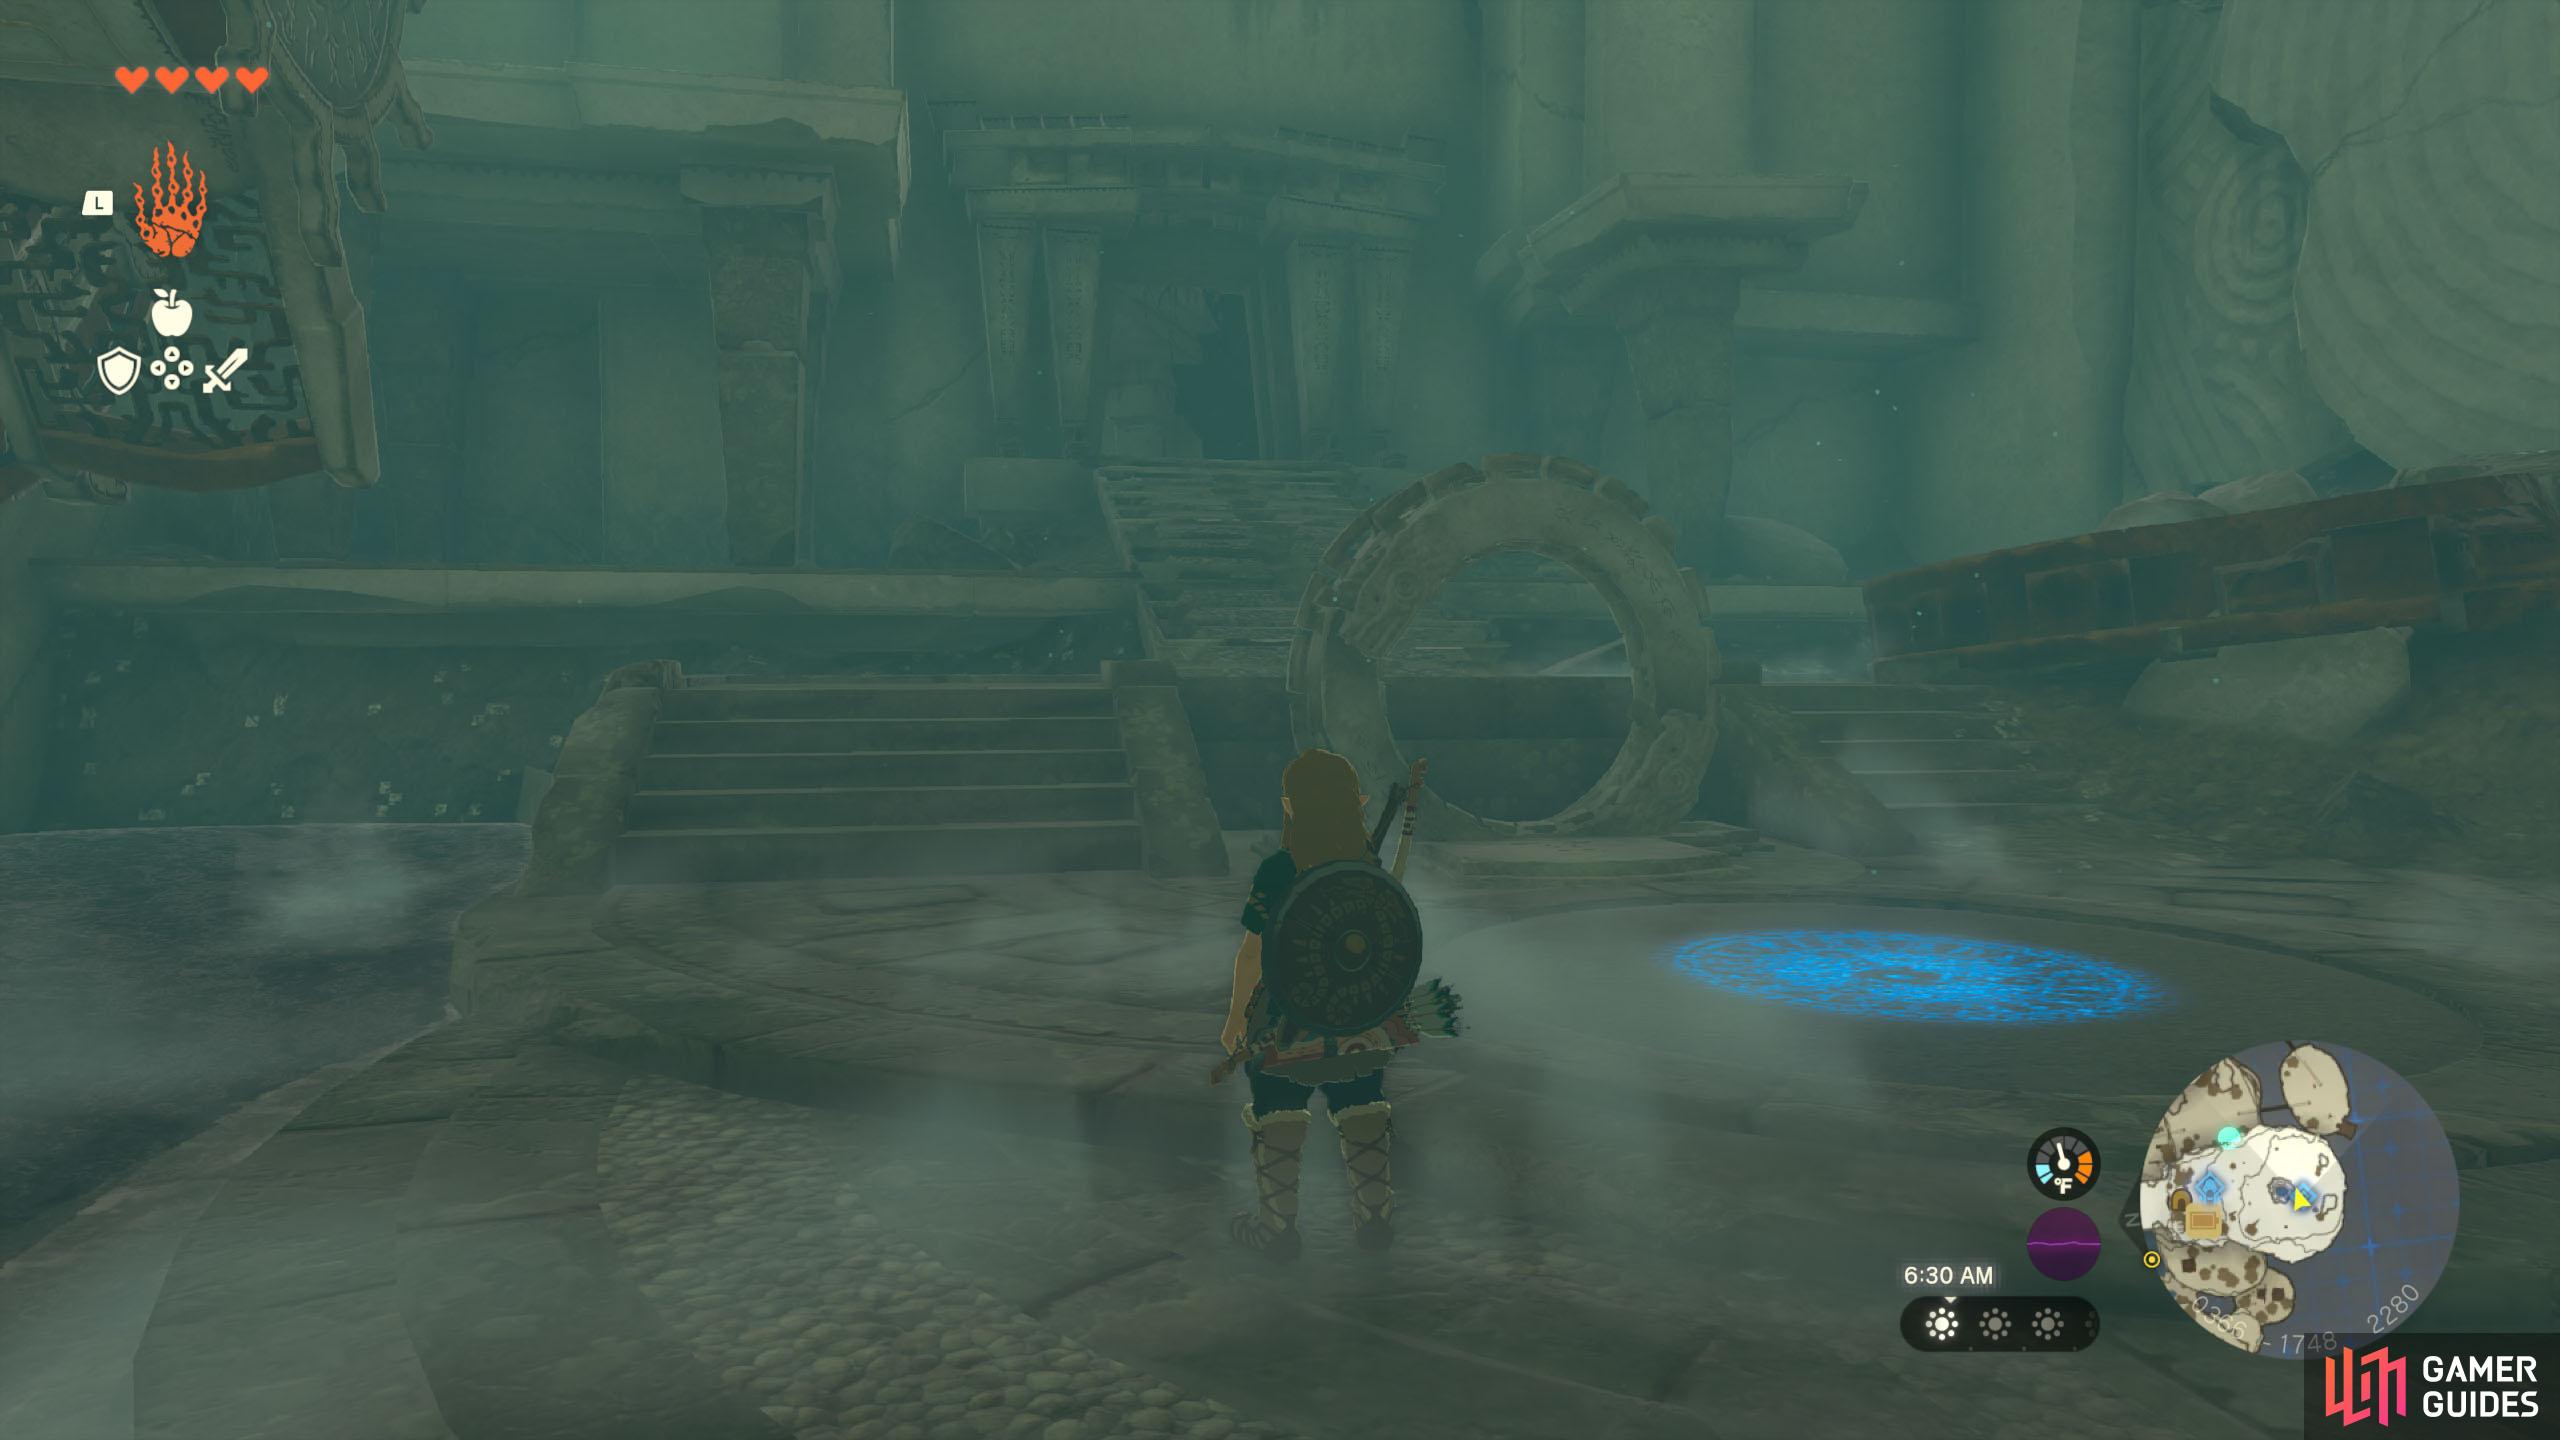 You’ll regain control of Link in the Temple of Time.